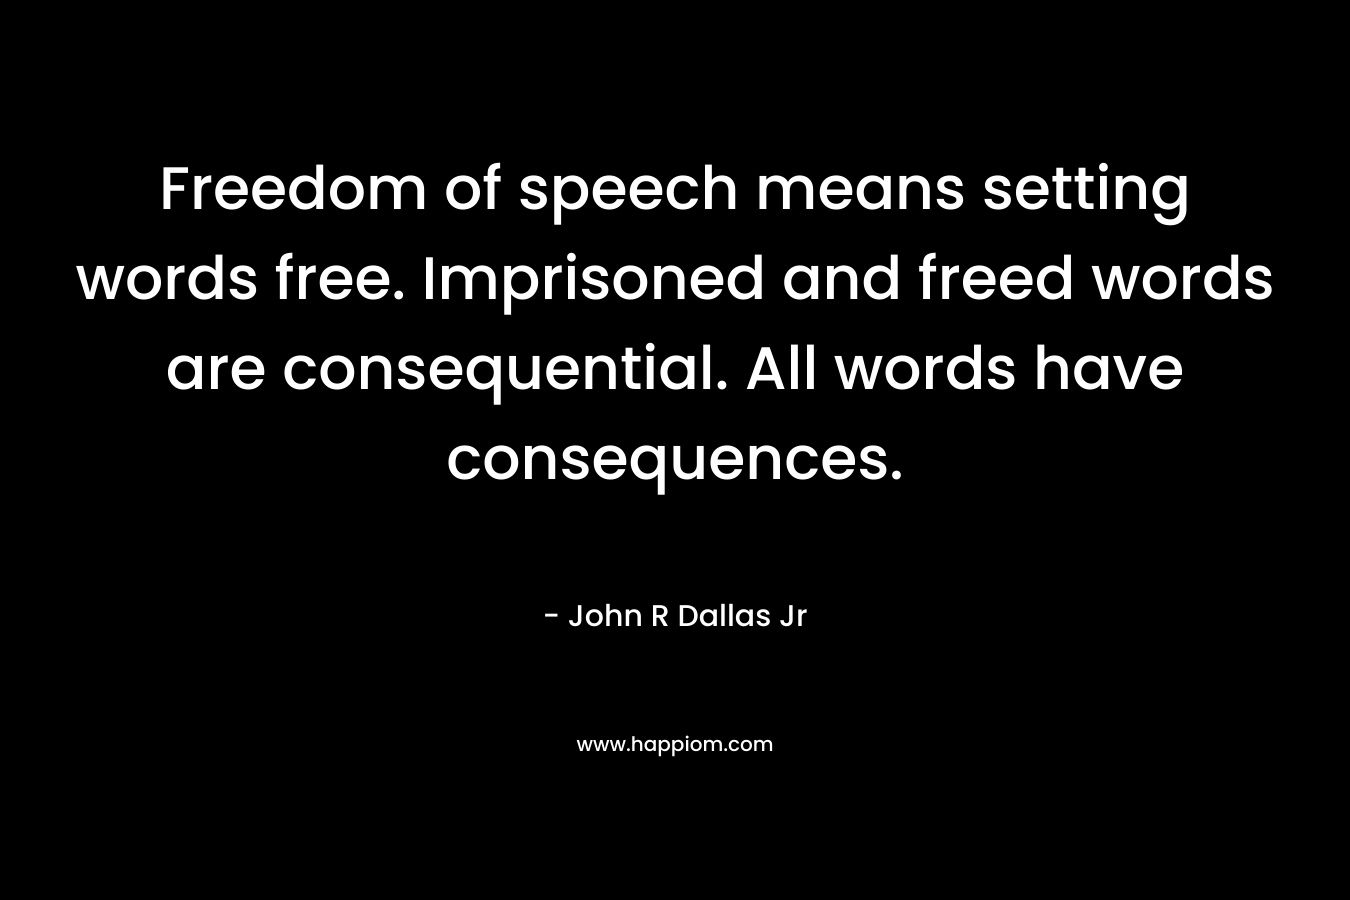 Freedom of speech means setting words free. Imprisoned and freed words are consequential. All words have consequences. – John R Dallas Jr